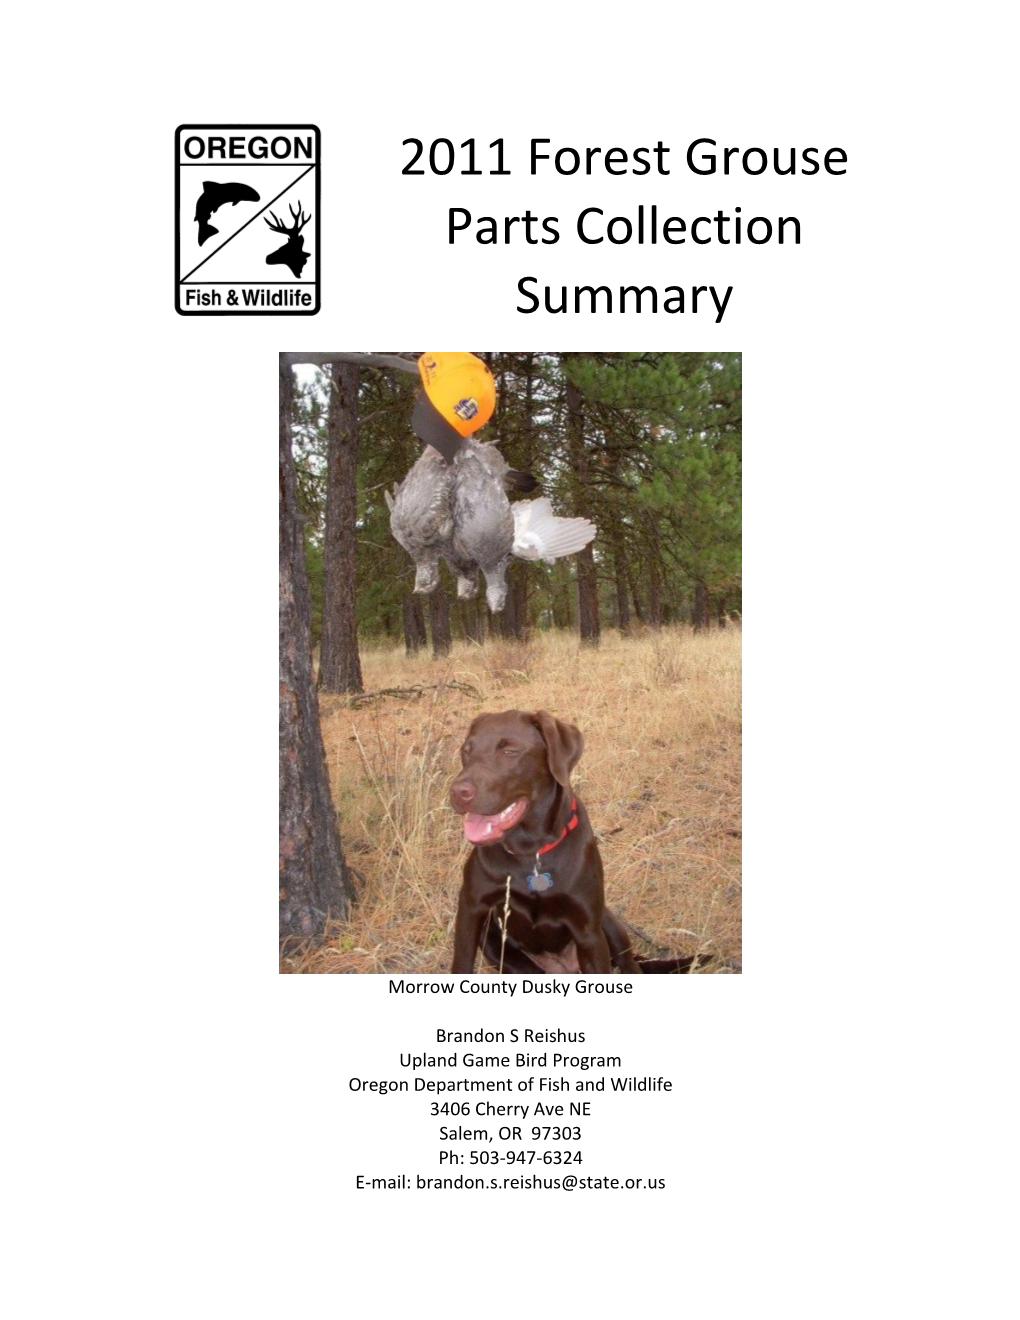 2011 Forest Grouse Parts Collection Summary